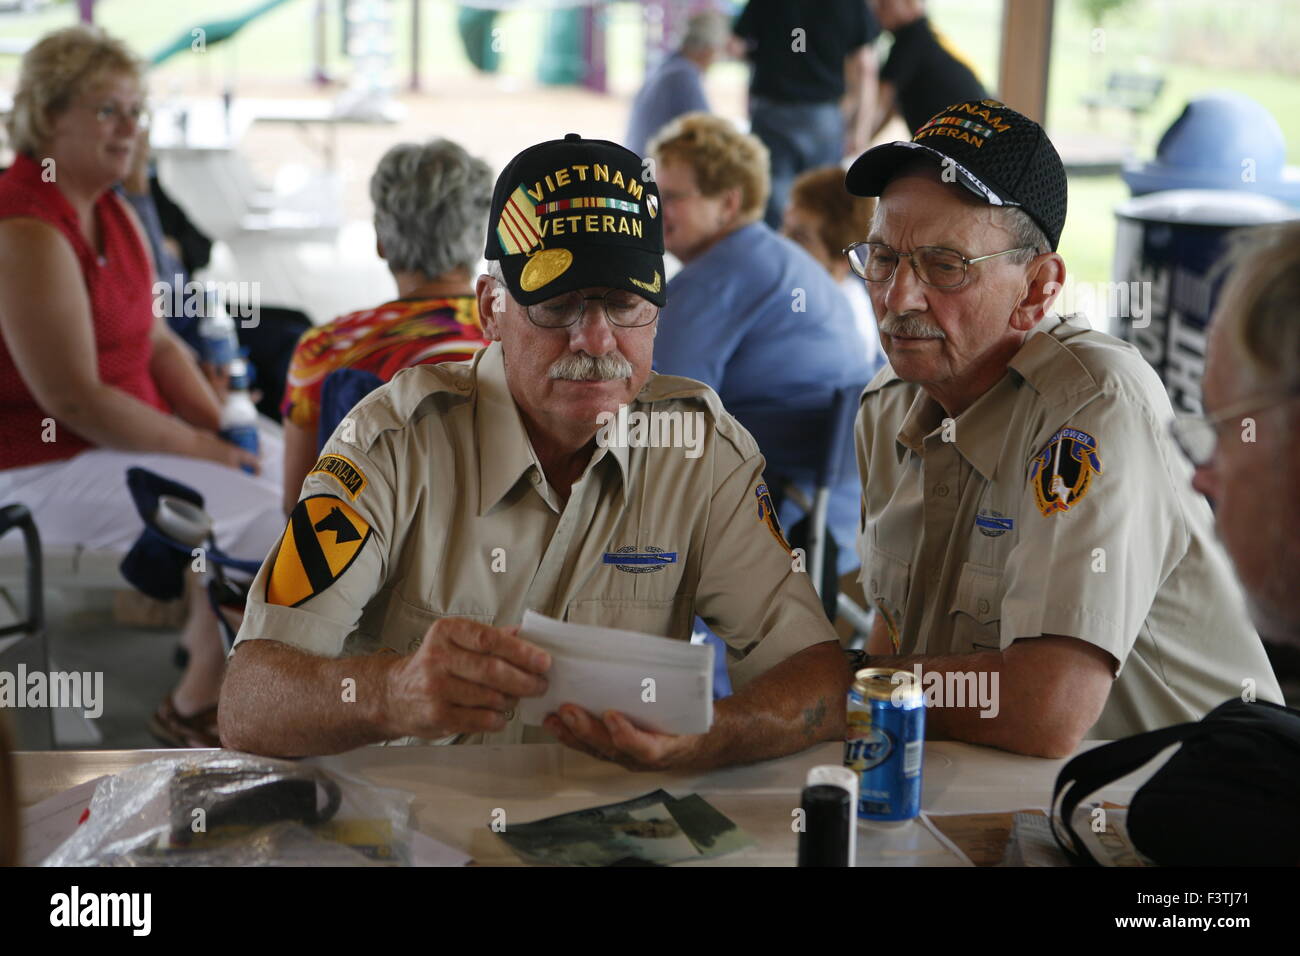 B Co. 1/7th Cavalry Reunion in Effingham, Illinois. July 31-Aug2, 2009. Stock Photo